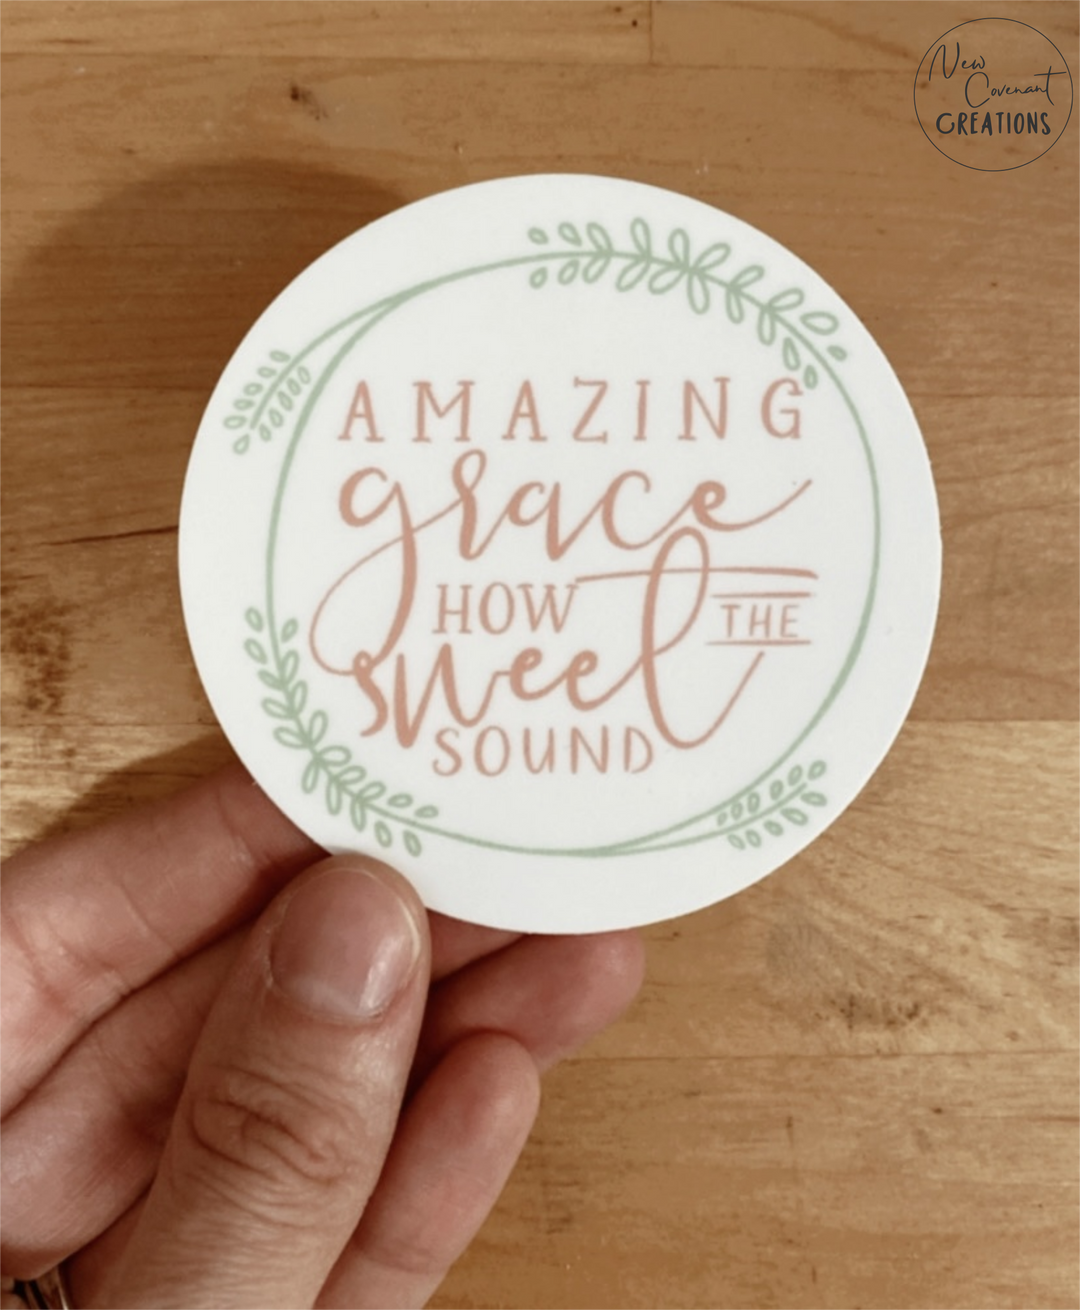 Amazing Grace How Sweet The Sound Sticker